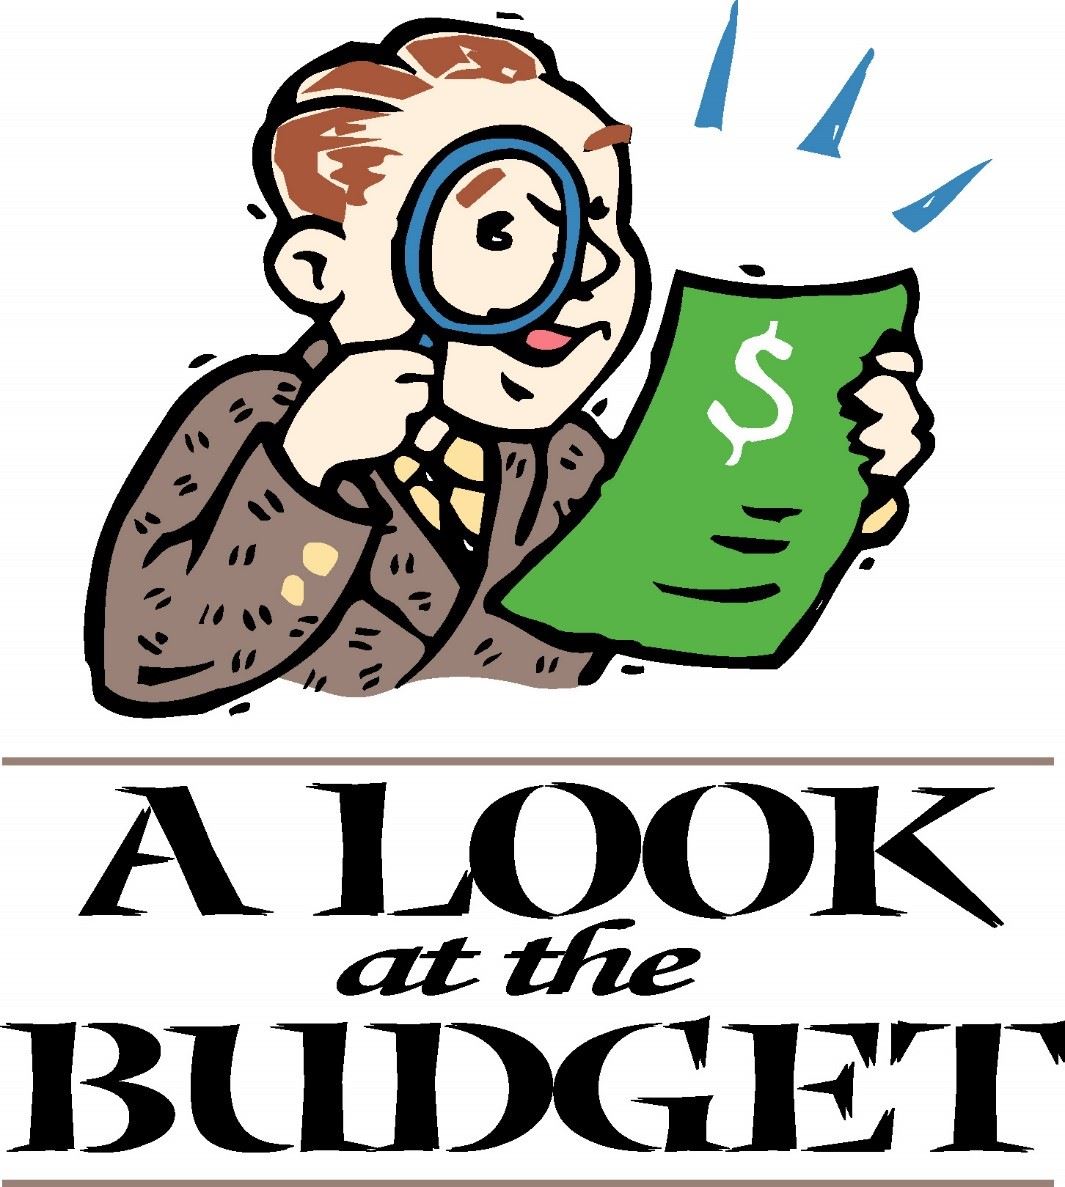 budget clipart annual budget